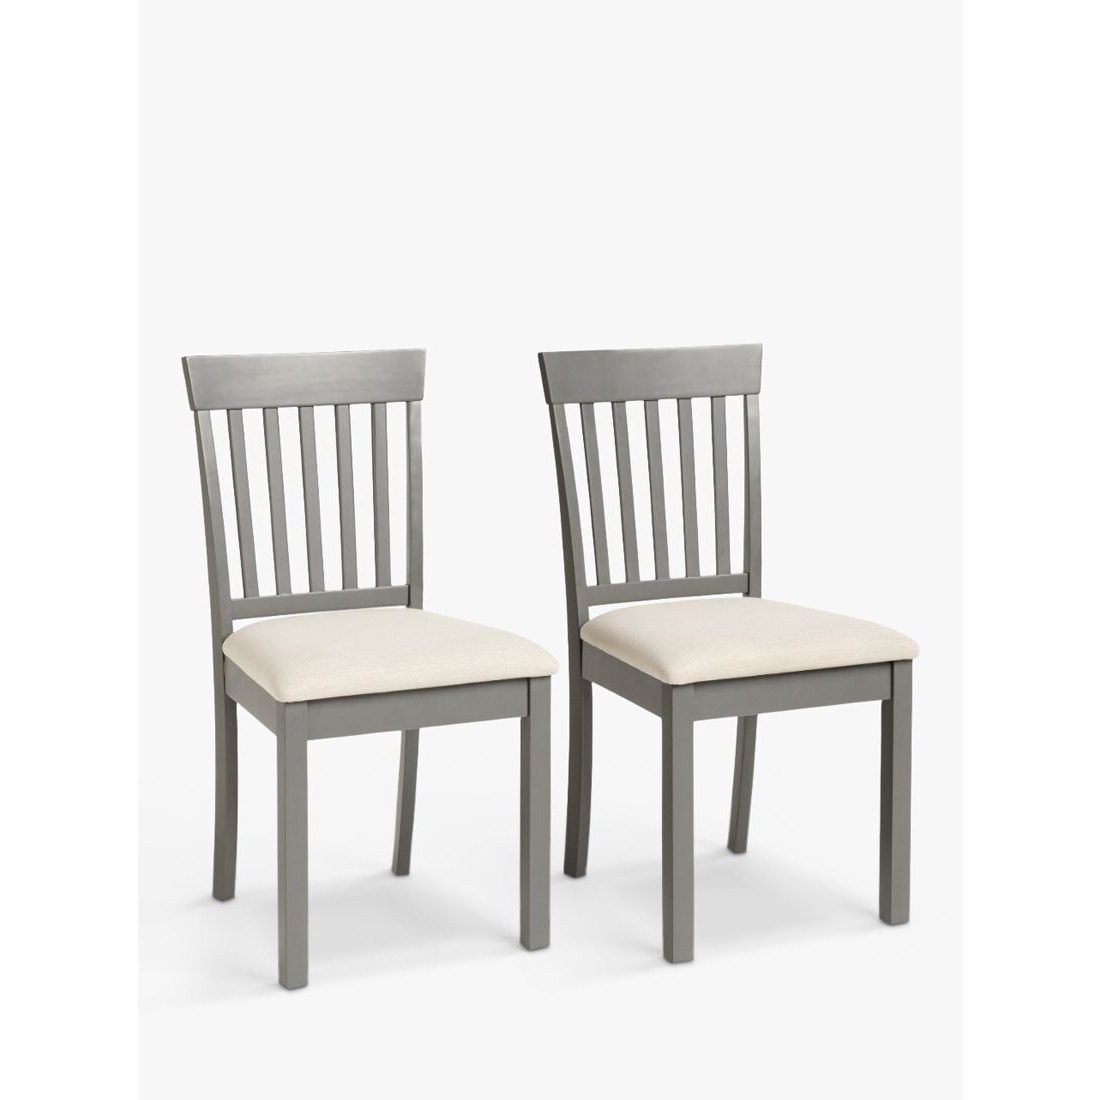 John Lewis ANYDAY Wilton Slatted Dining Chair, Set of 2, Grey - image 1